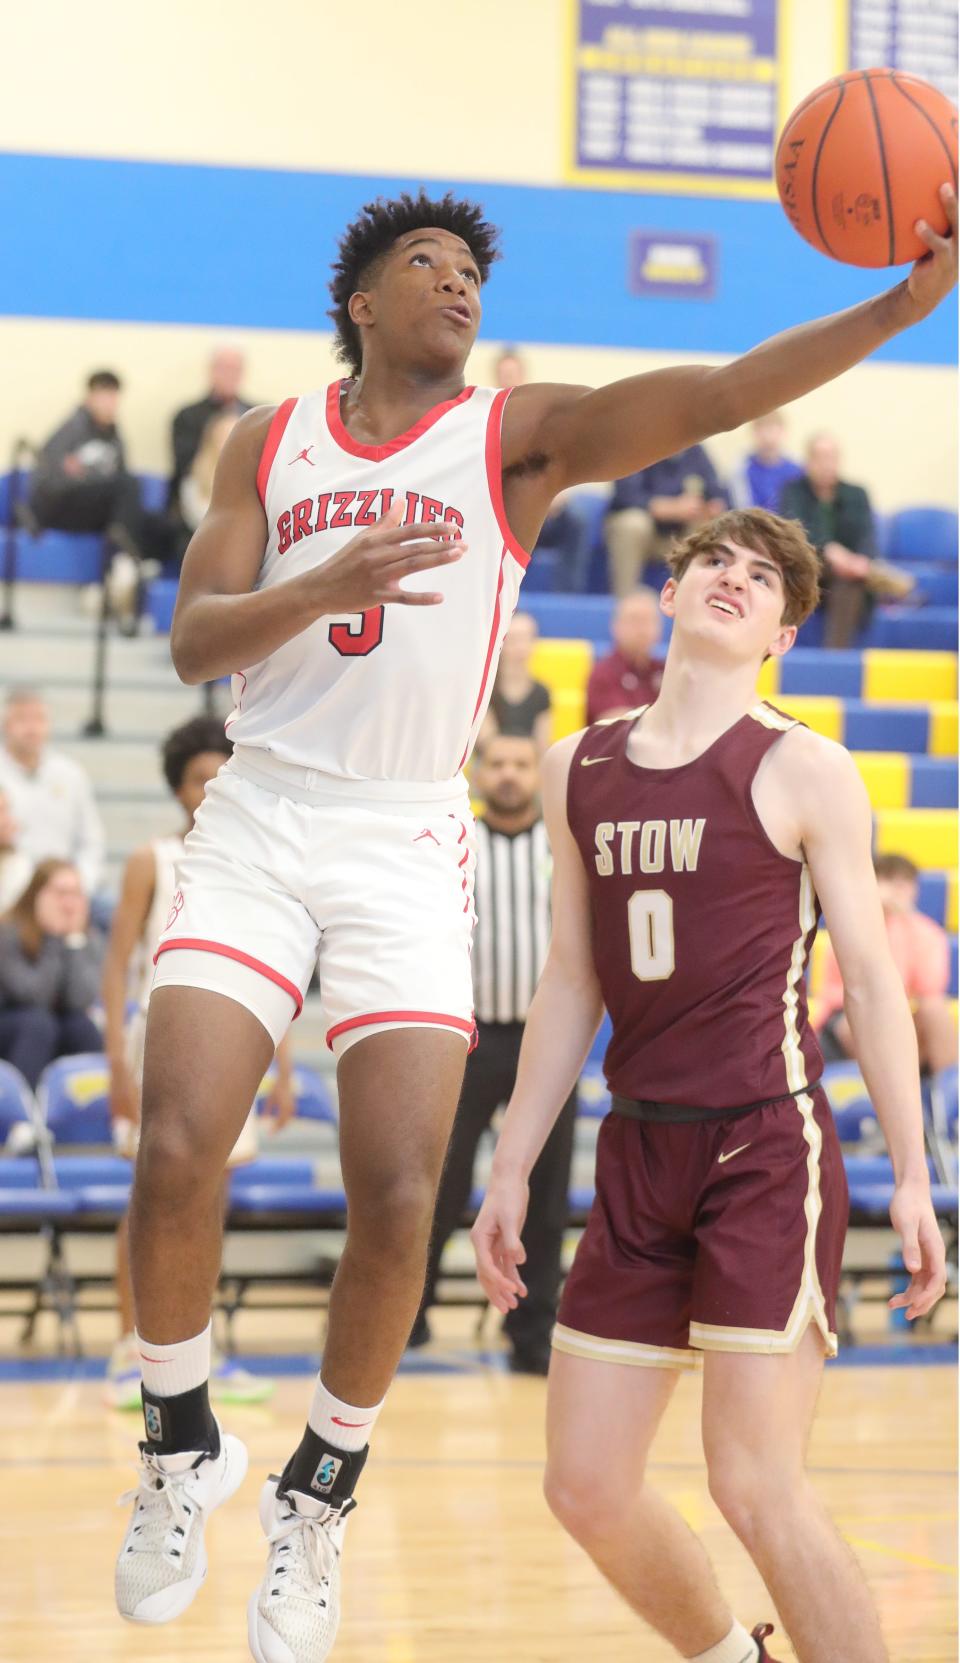 Wadsworth's Solomon Callaghan drives to the basket past Stow's Reece Raymond-Smith in the Greater Akron Basketball Coaches Association Underclassman All-Star game, Tuesday, March 15, 2022 at Coventry High School.